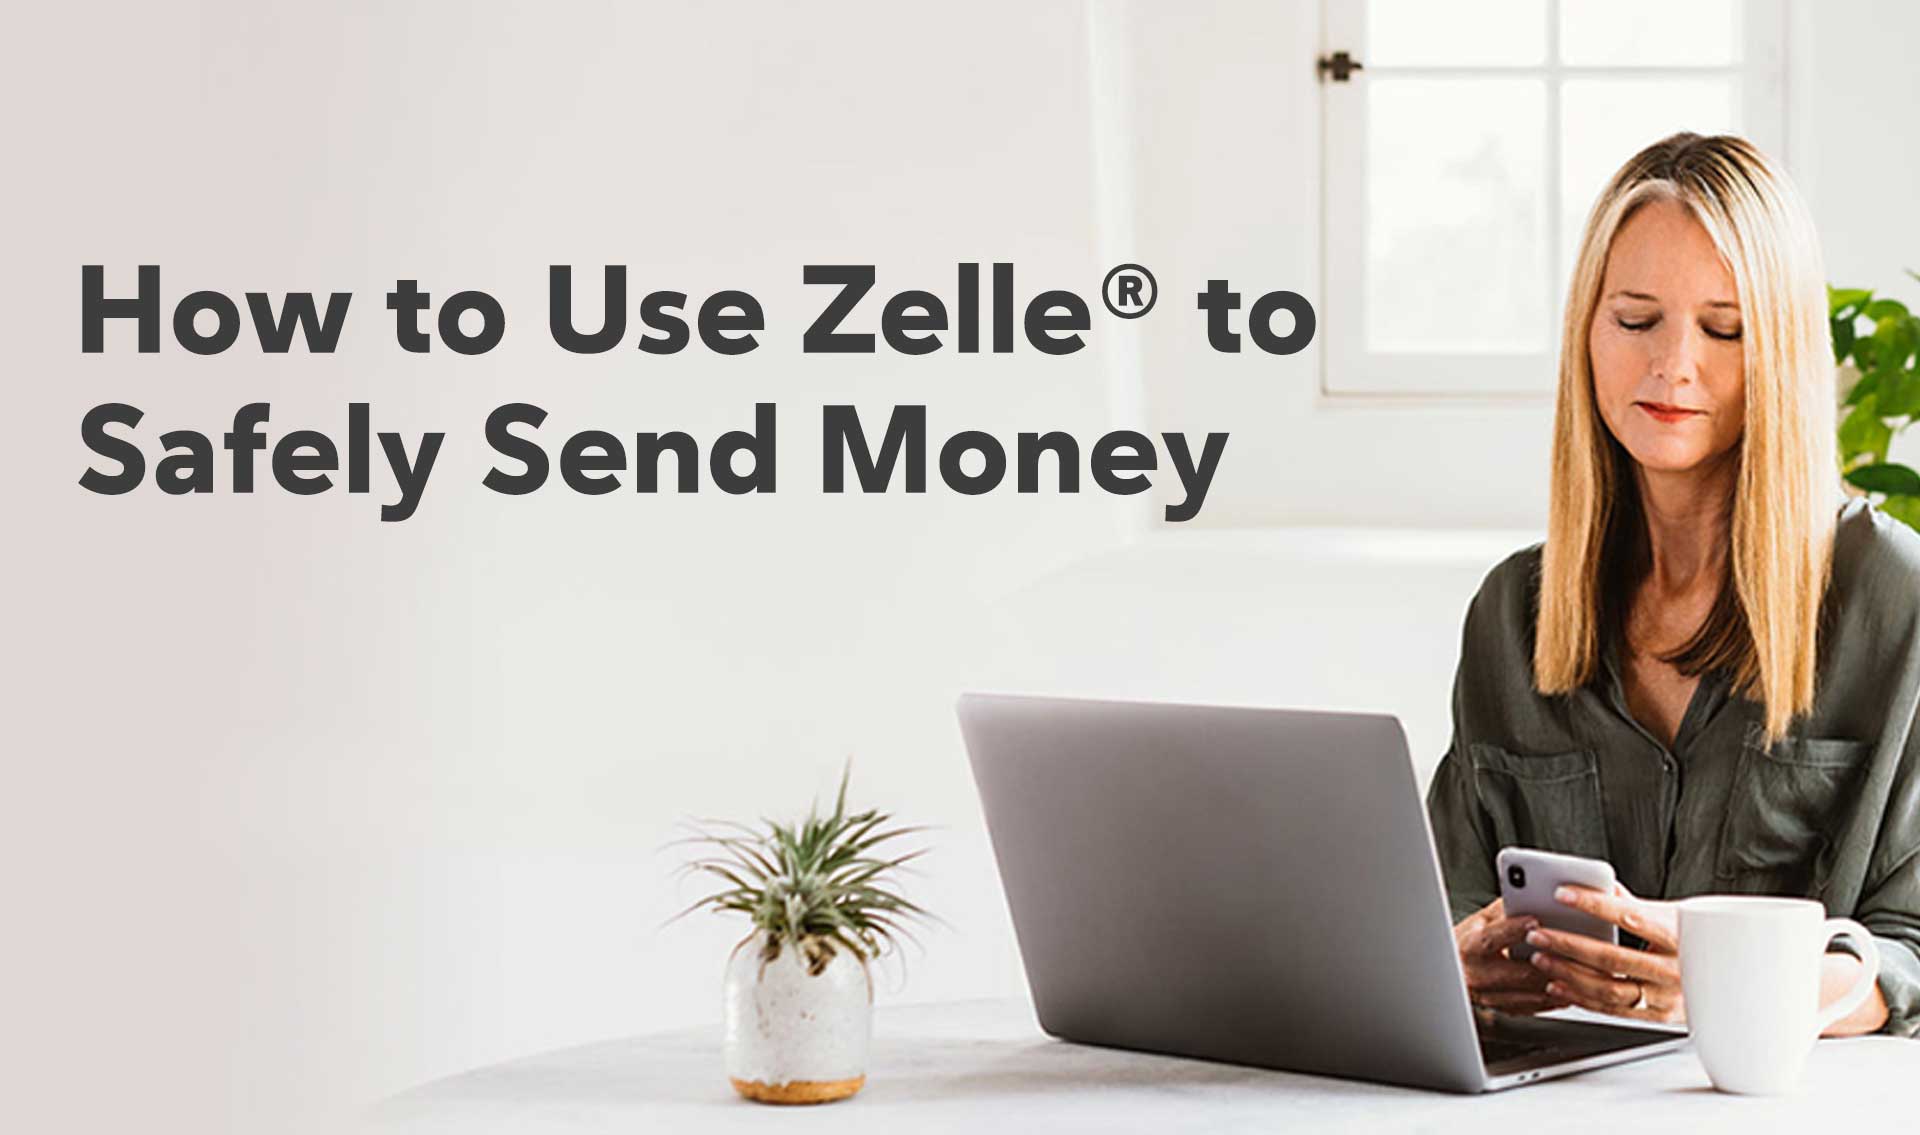 How to Safely Send Money with Zelle